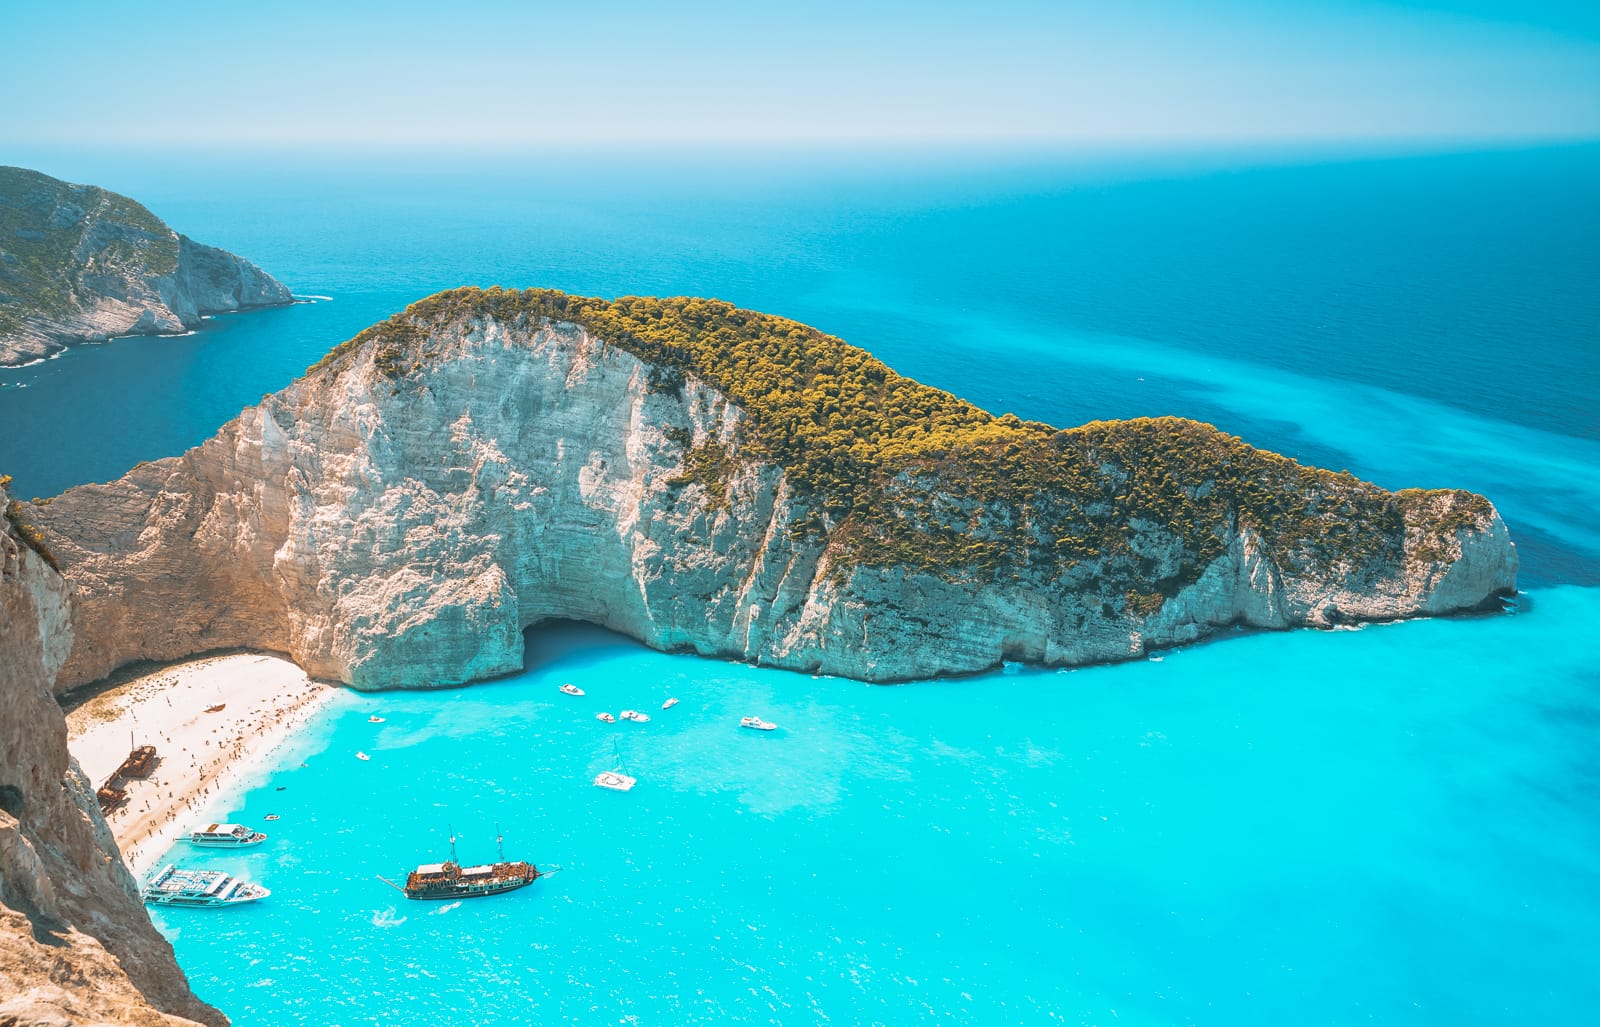 20 Very Best Greek Islands To Visit - Hand Luggage Only - Travel, Food & Photography Blog